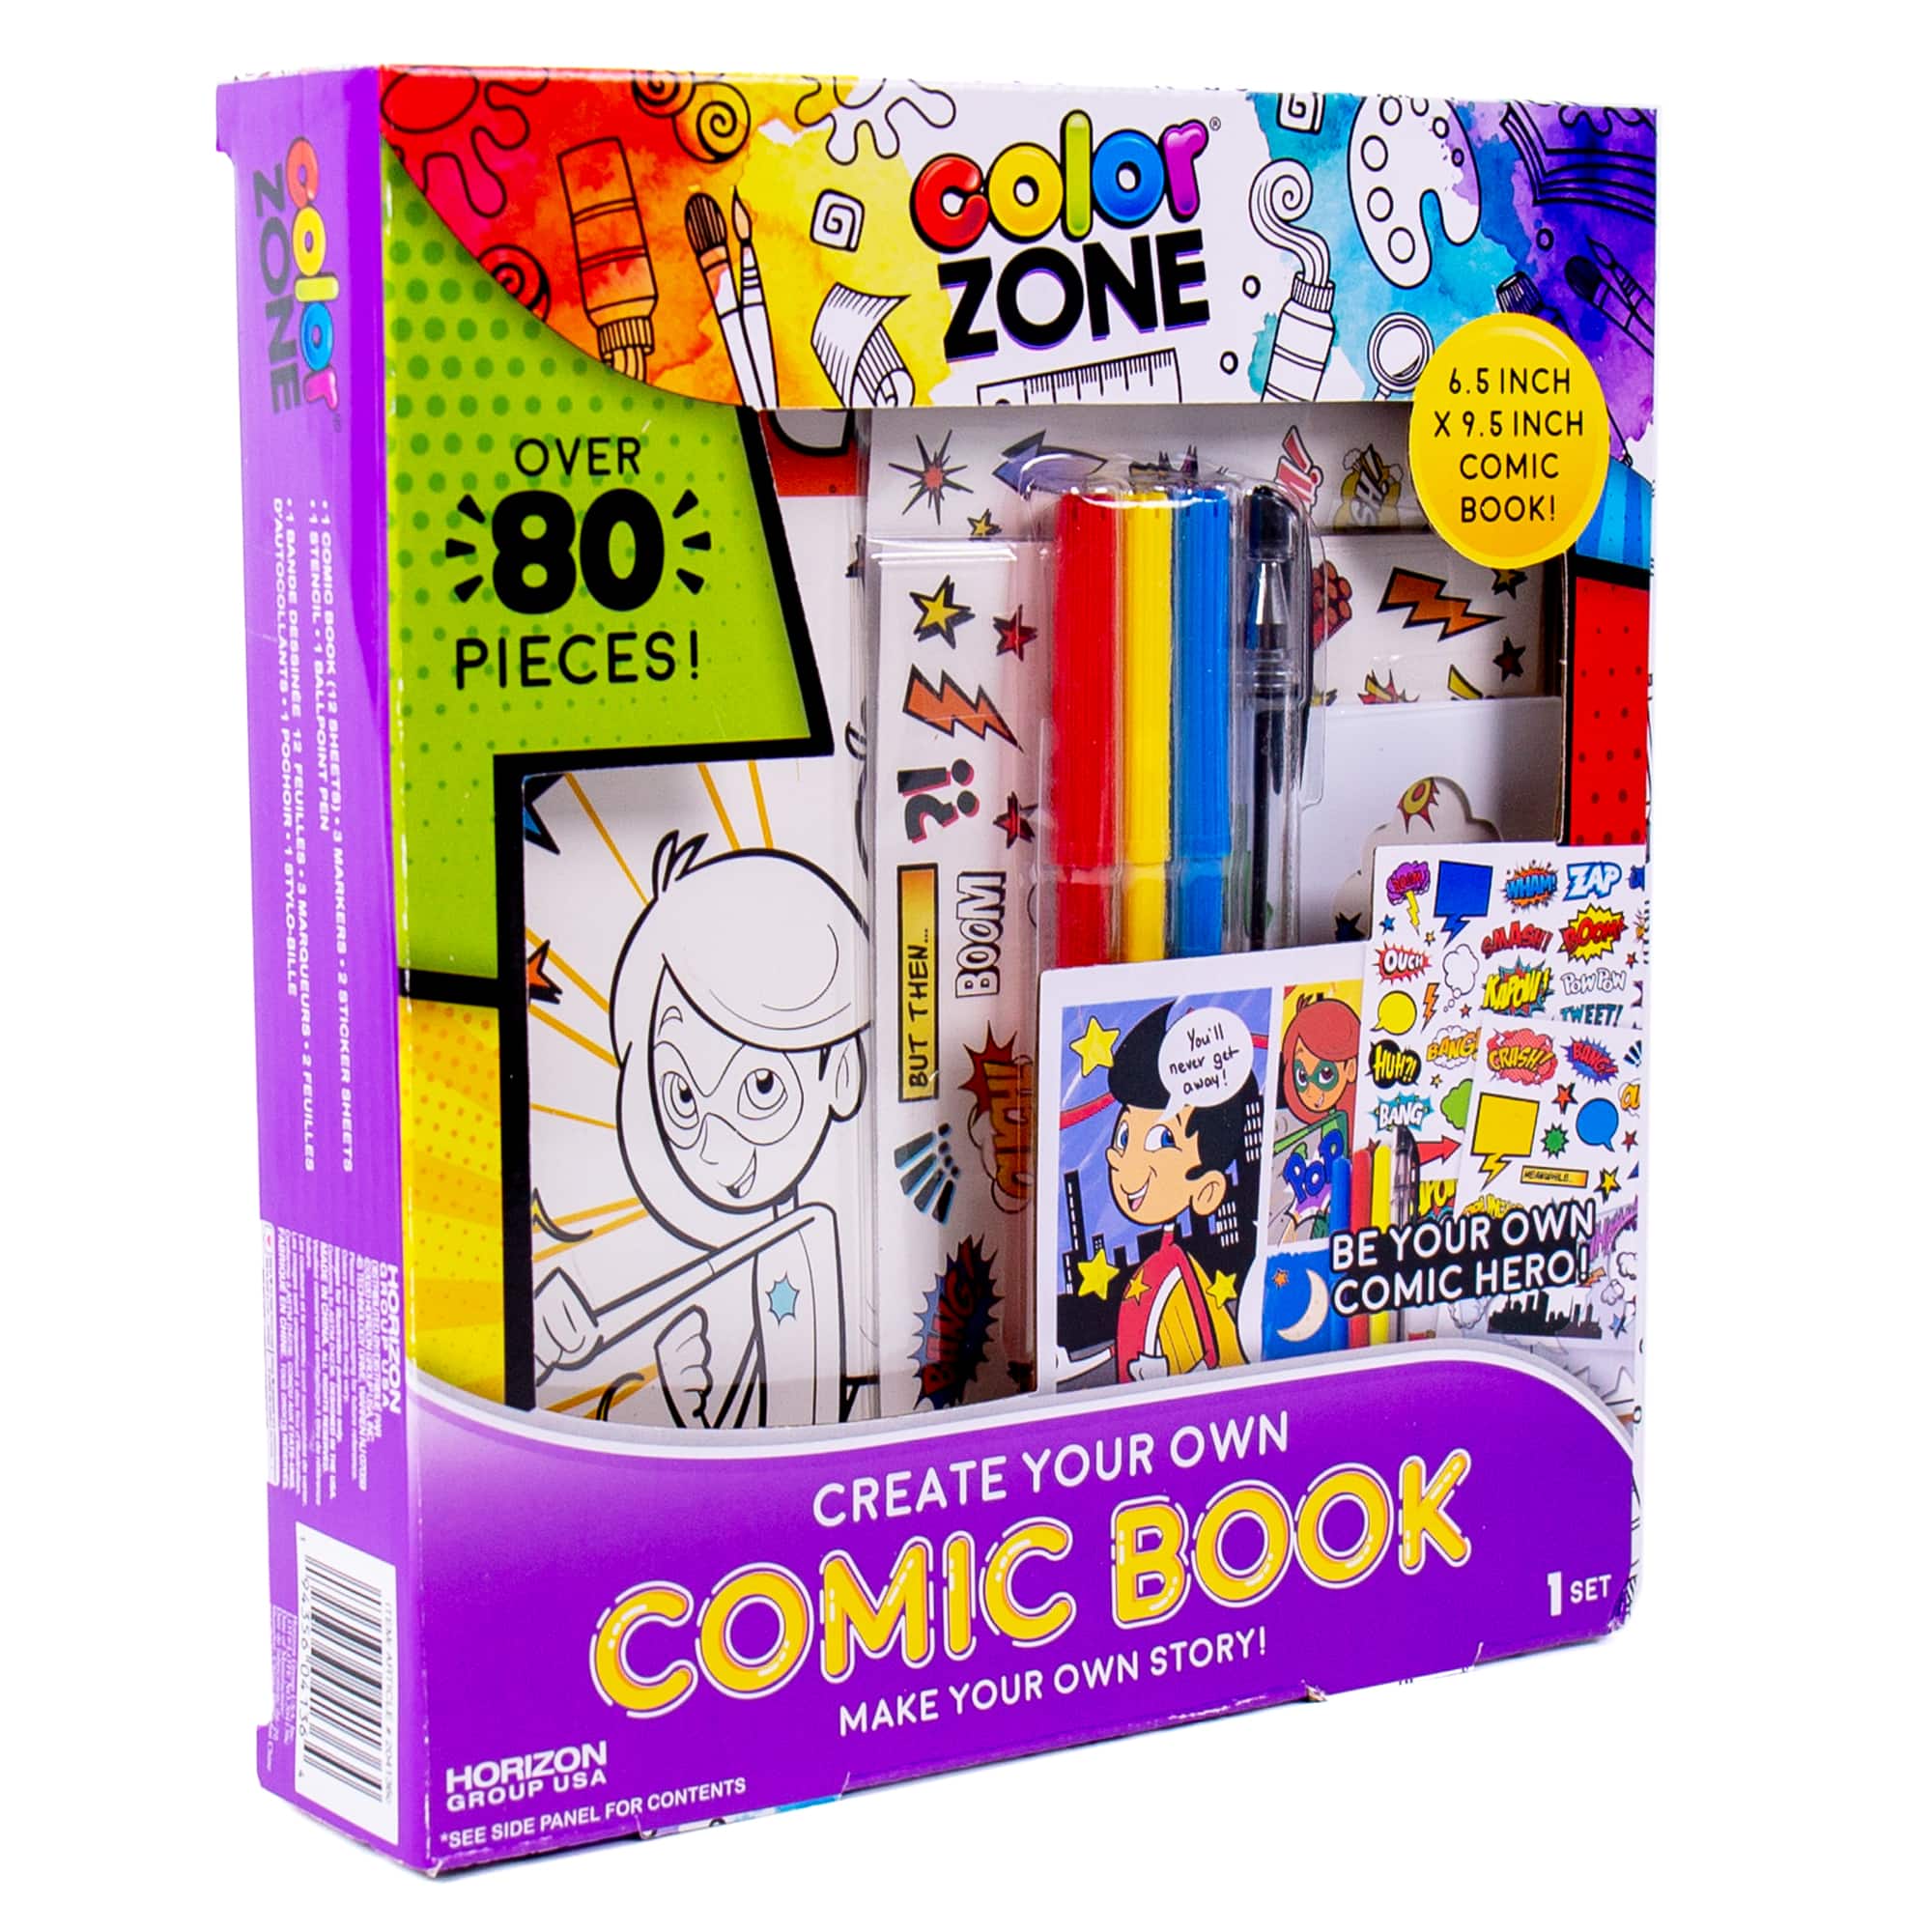 Make Your Own Comic Book Kit by Brinkerhoff, Other Format